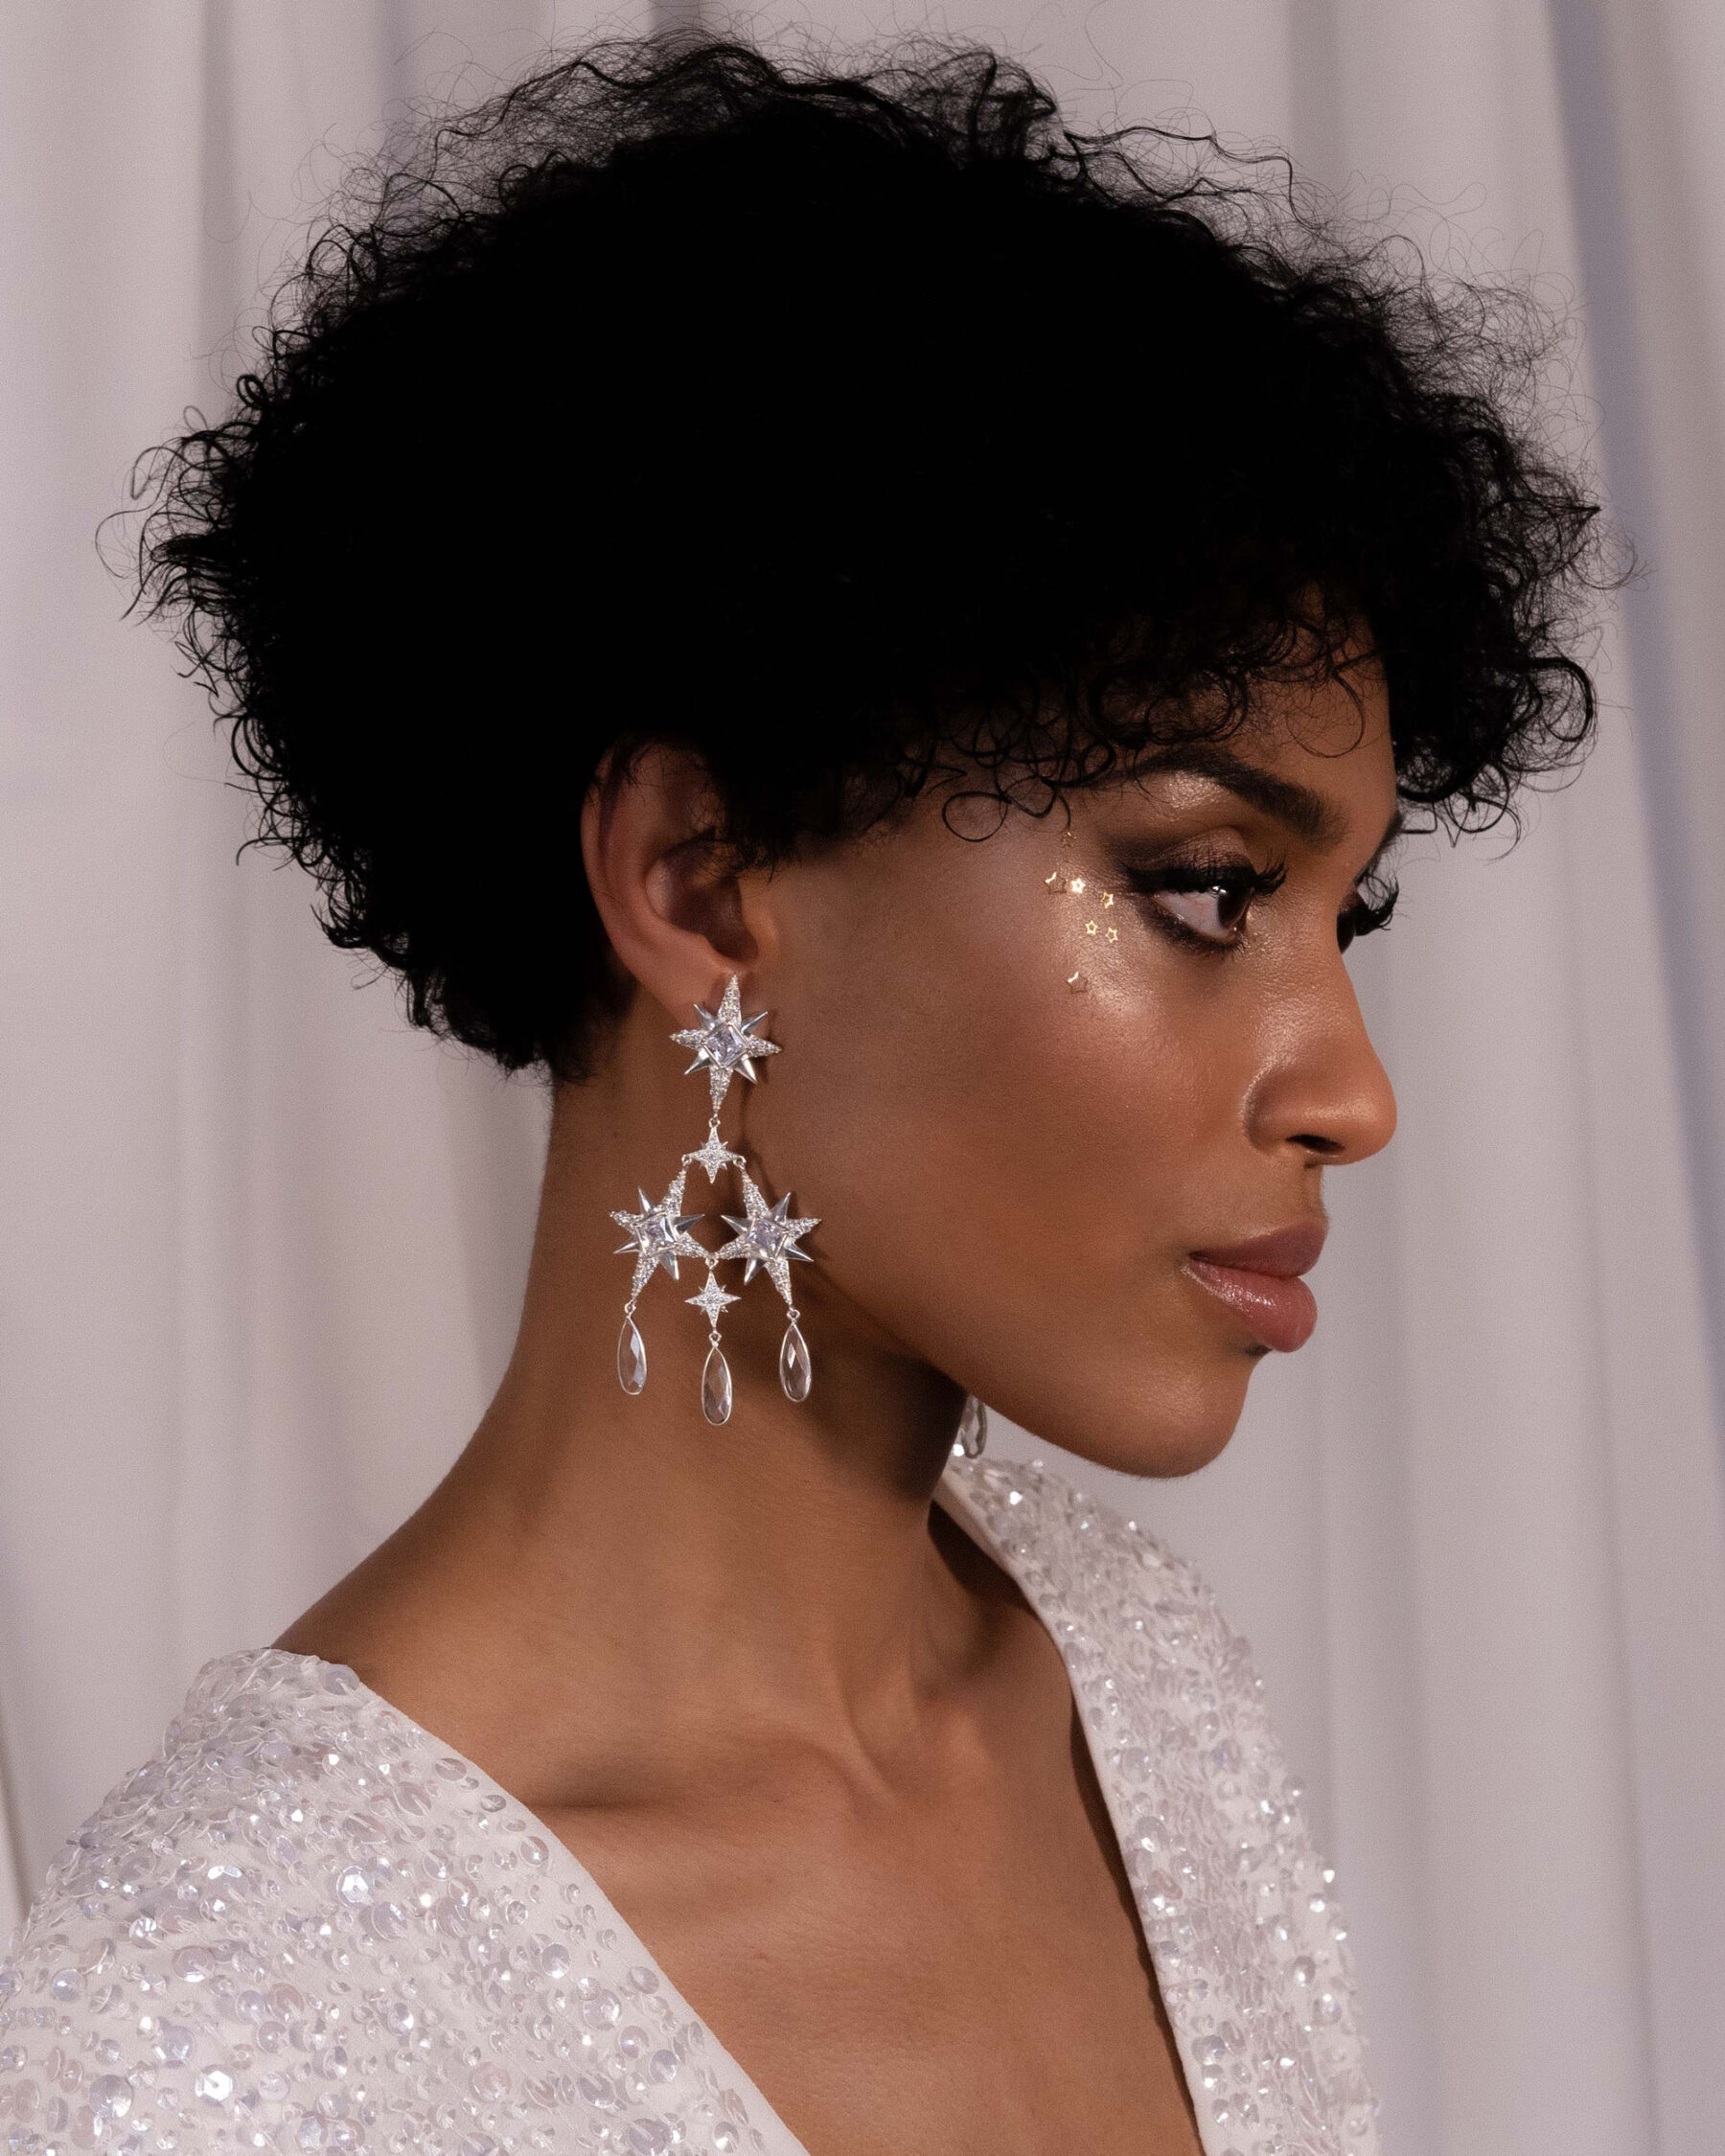 Victoria Percival - black model wearing statement starry and celestial earrings. 